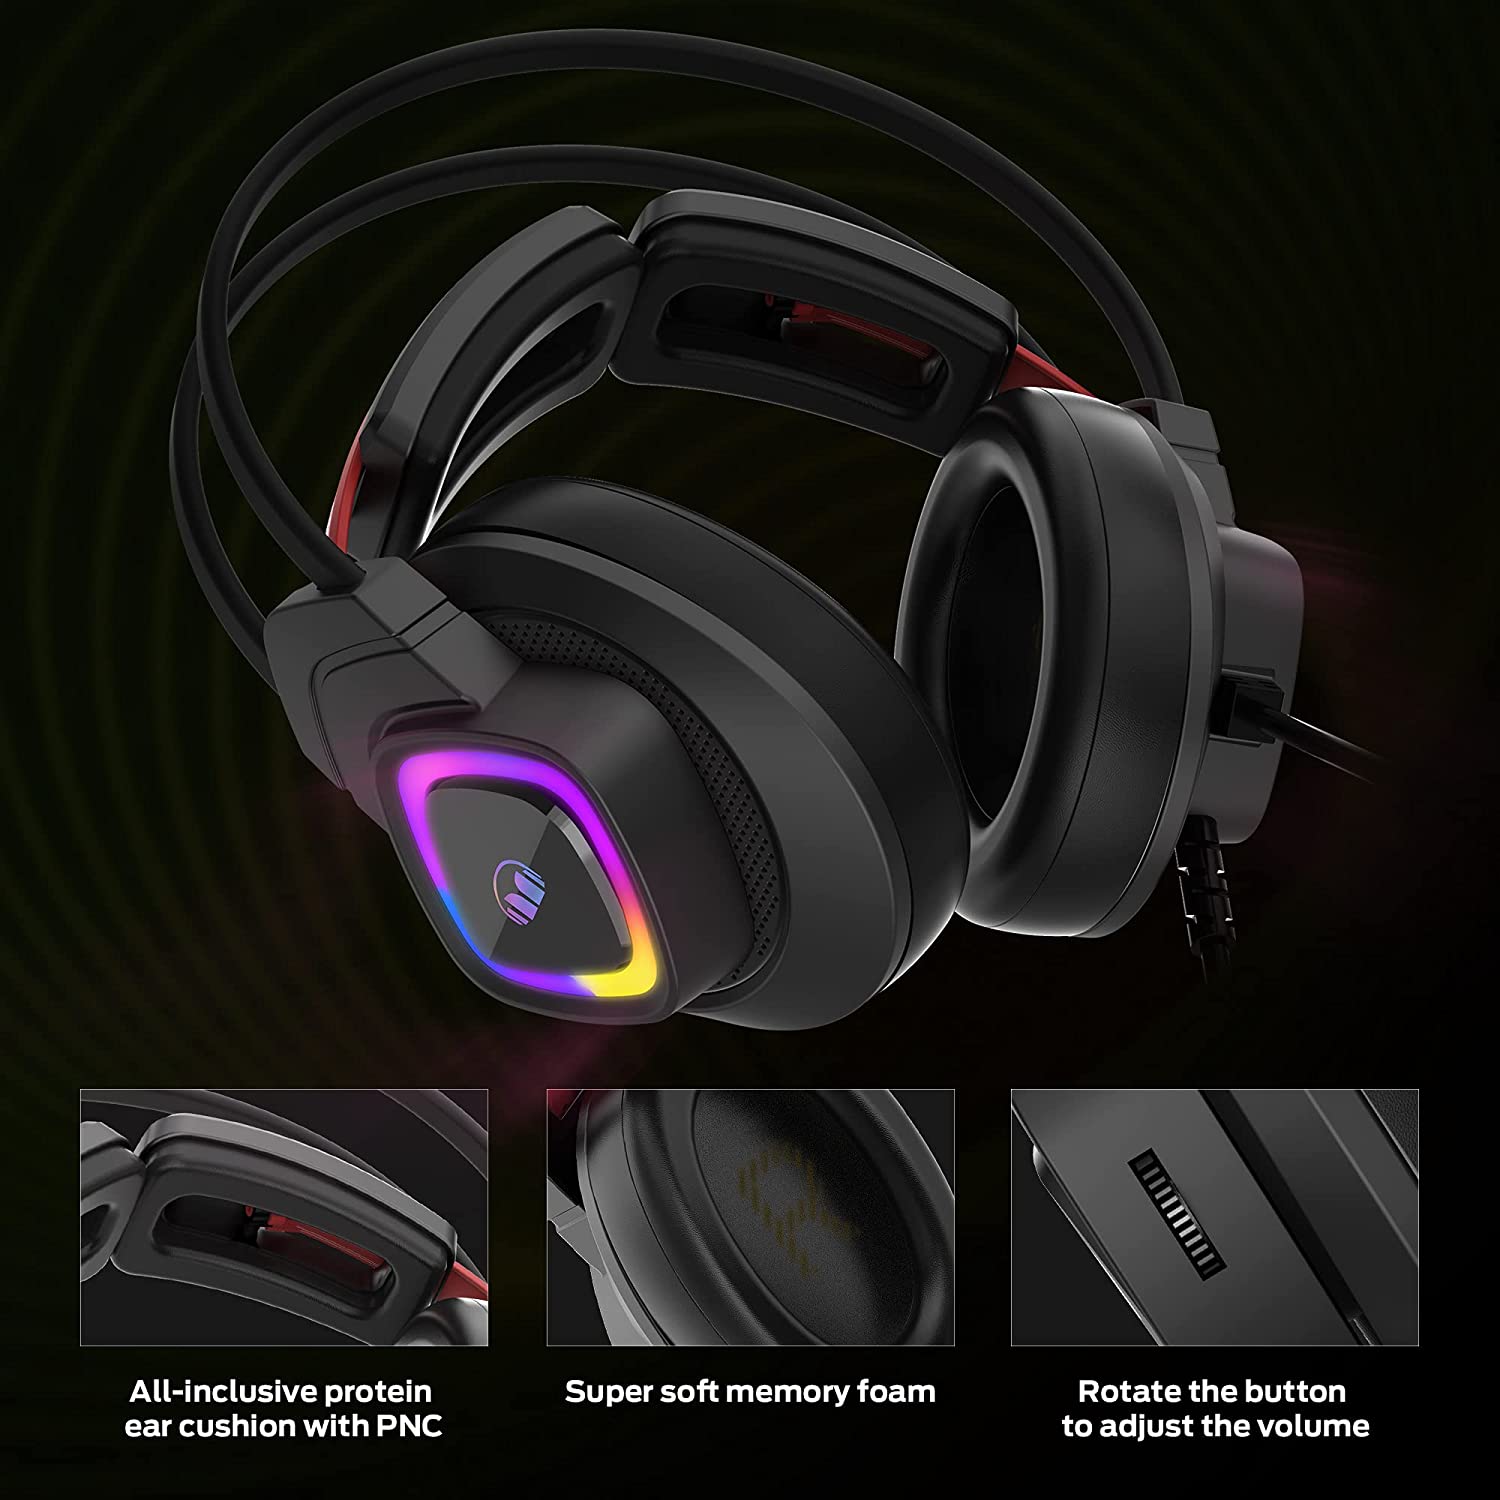 Audifonos Gamer Monster Mission Bot RGB PC PS4 Xbox Negro